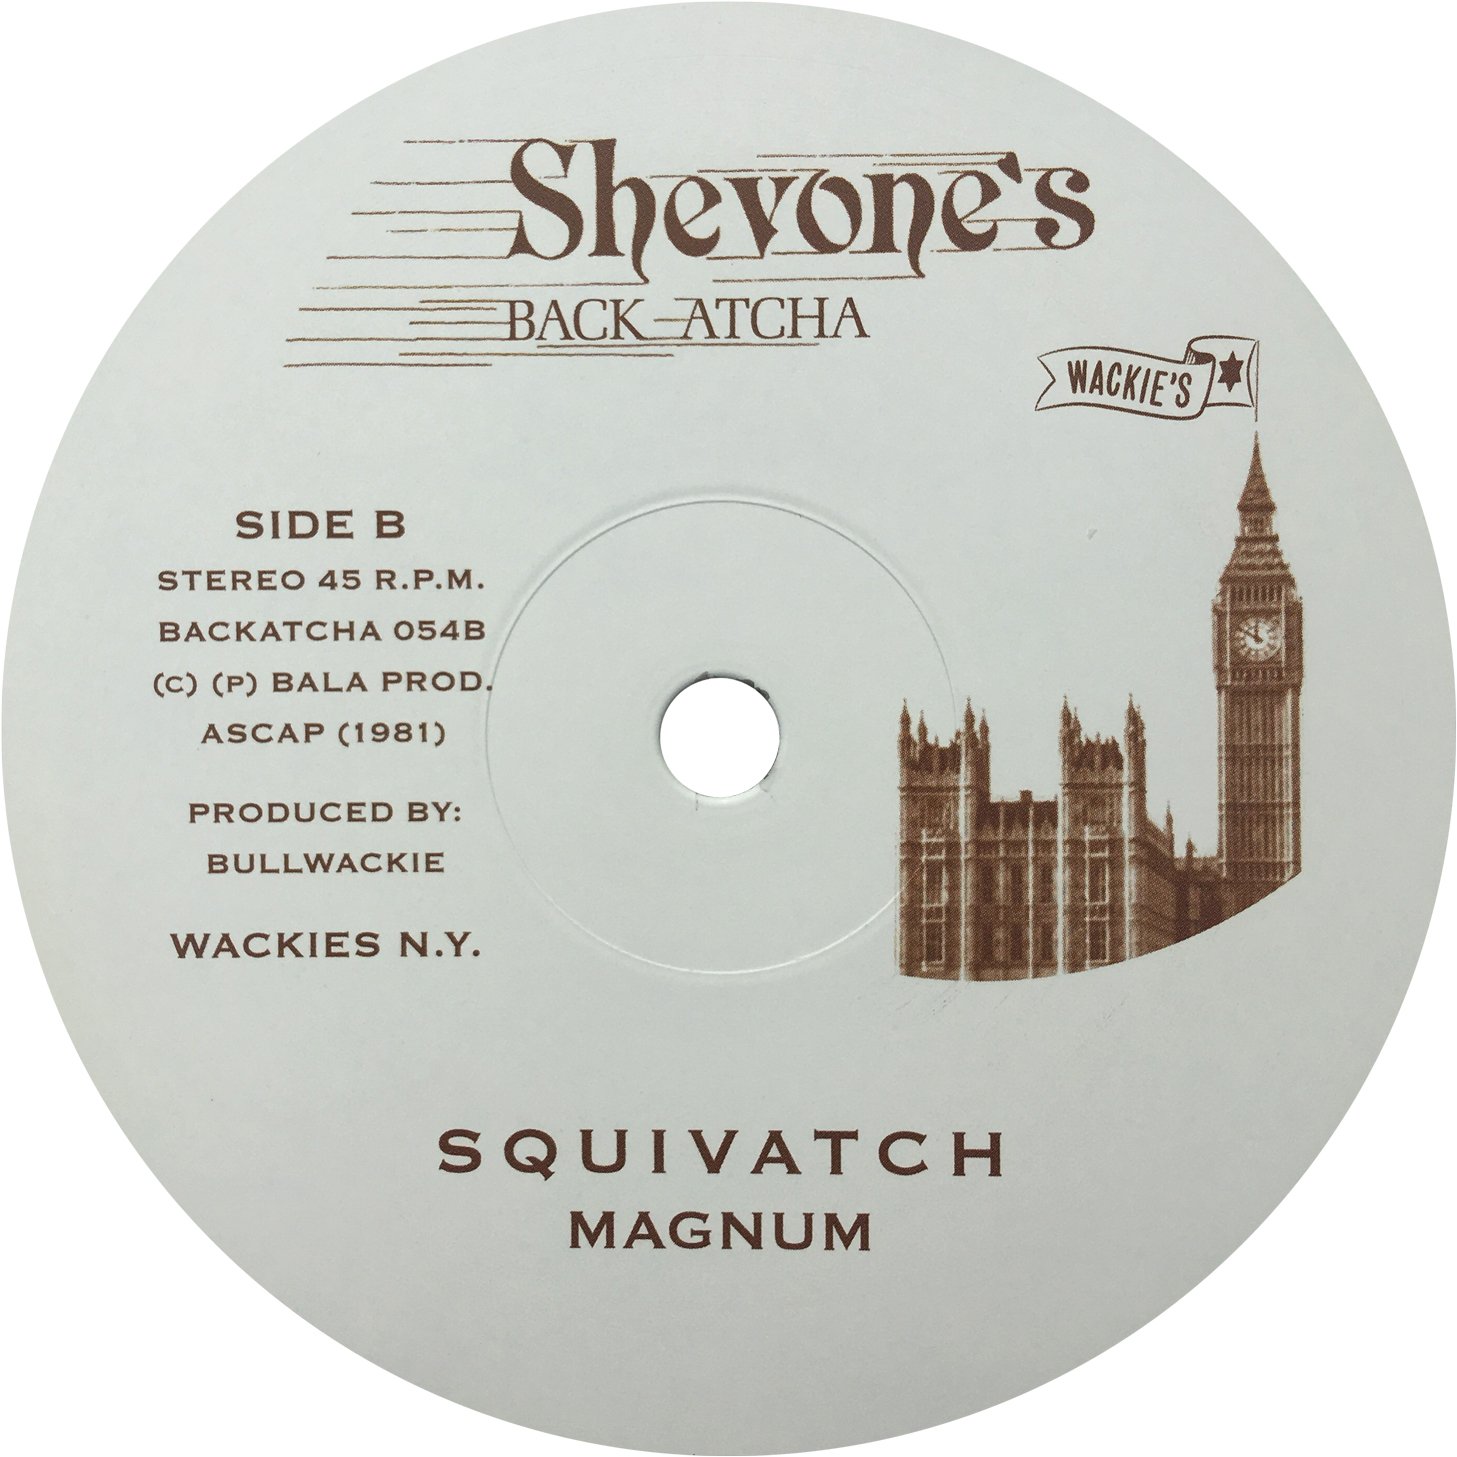 Image of WACKIES 12” Magnum - Squivatch / Golden Voice & Co - Mix Master. 